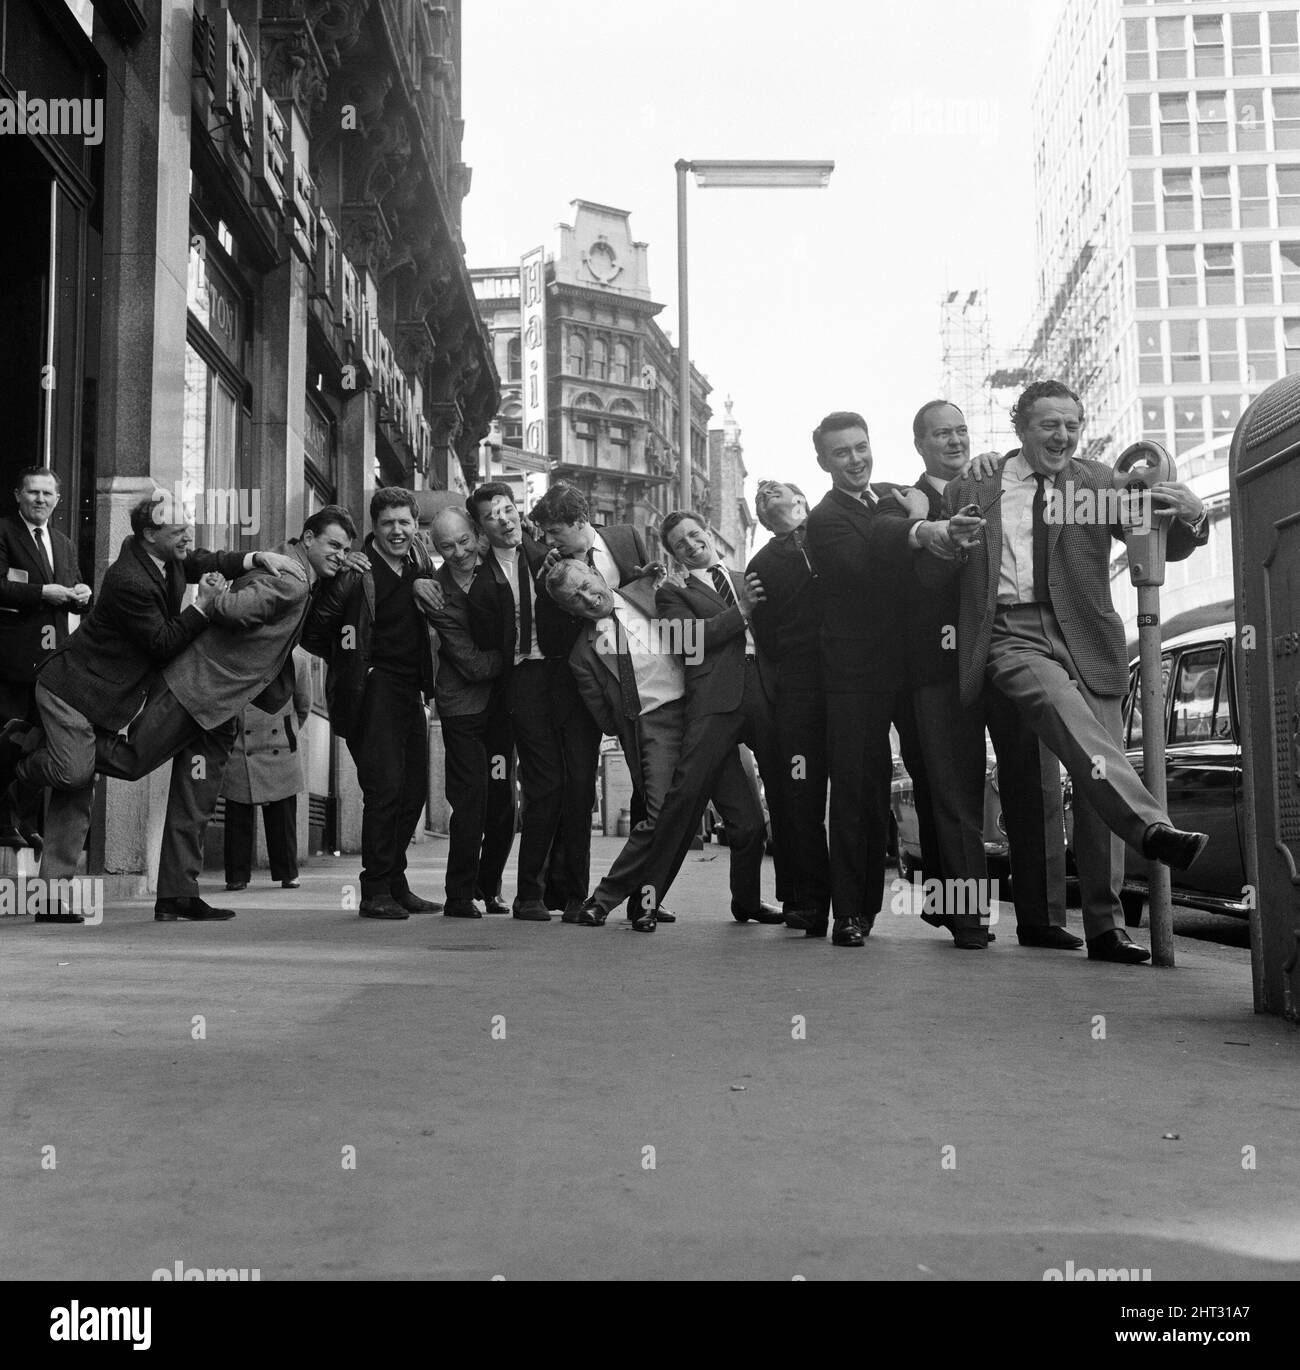 What a sight for TV crime series fans. Here pictured during a break in rehearsals for tonight's show at London's Prince of Wales Theatre are a team of TV cops. Putting the policeman's lock on each other are Z-Cars Inspector Barlow (Stratford Johns) with his colleagues Robert Keegan, James Brady, Brian Blessed, Frank Windsor, James Ellis, Colin Welland, Peter Byrne, Geoffrey Adams, Johnny Briggs, Michael McStay, Robert Raglan, Bruce Seaton and Rupert Davies. 28th March 1965. Stock Photo